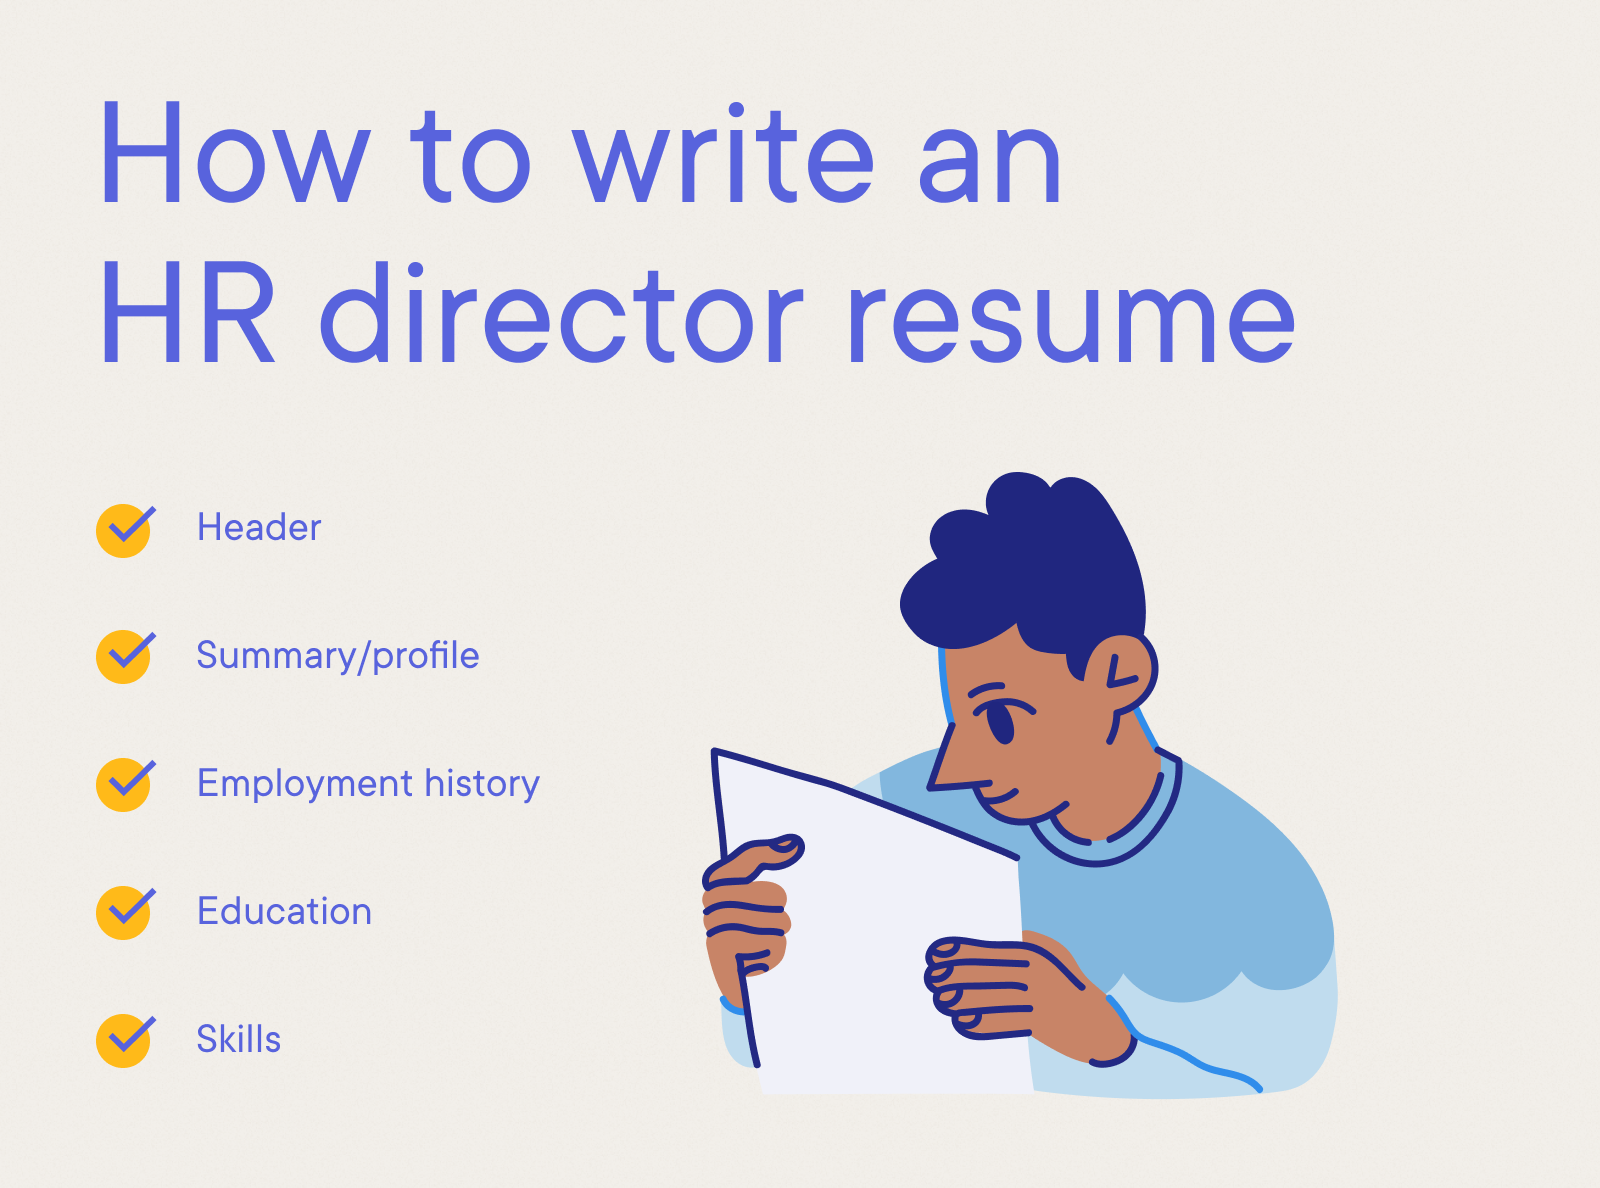 HR Director - How to write an HR director resume